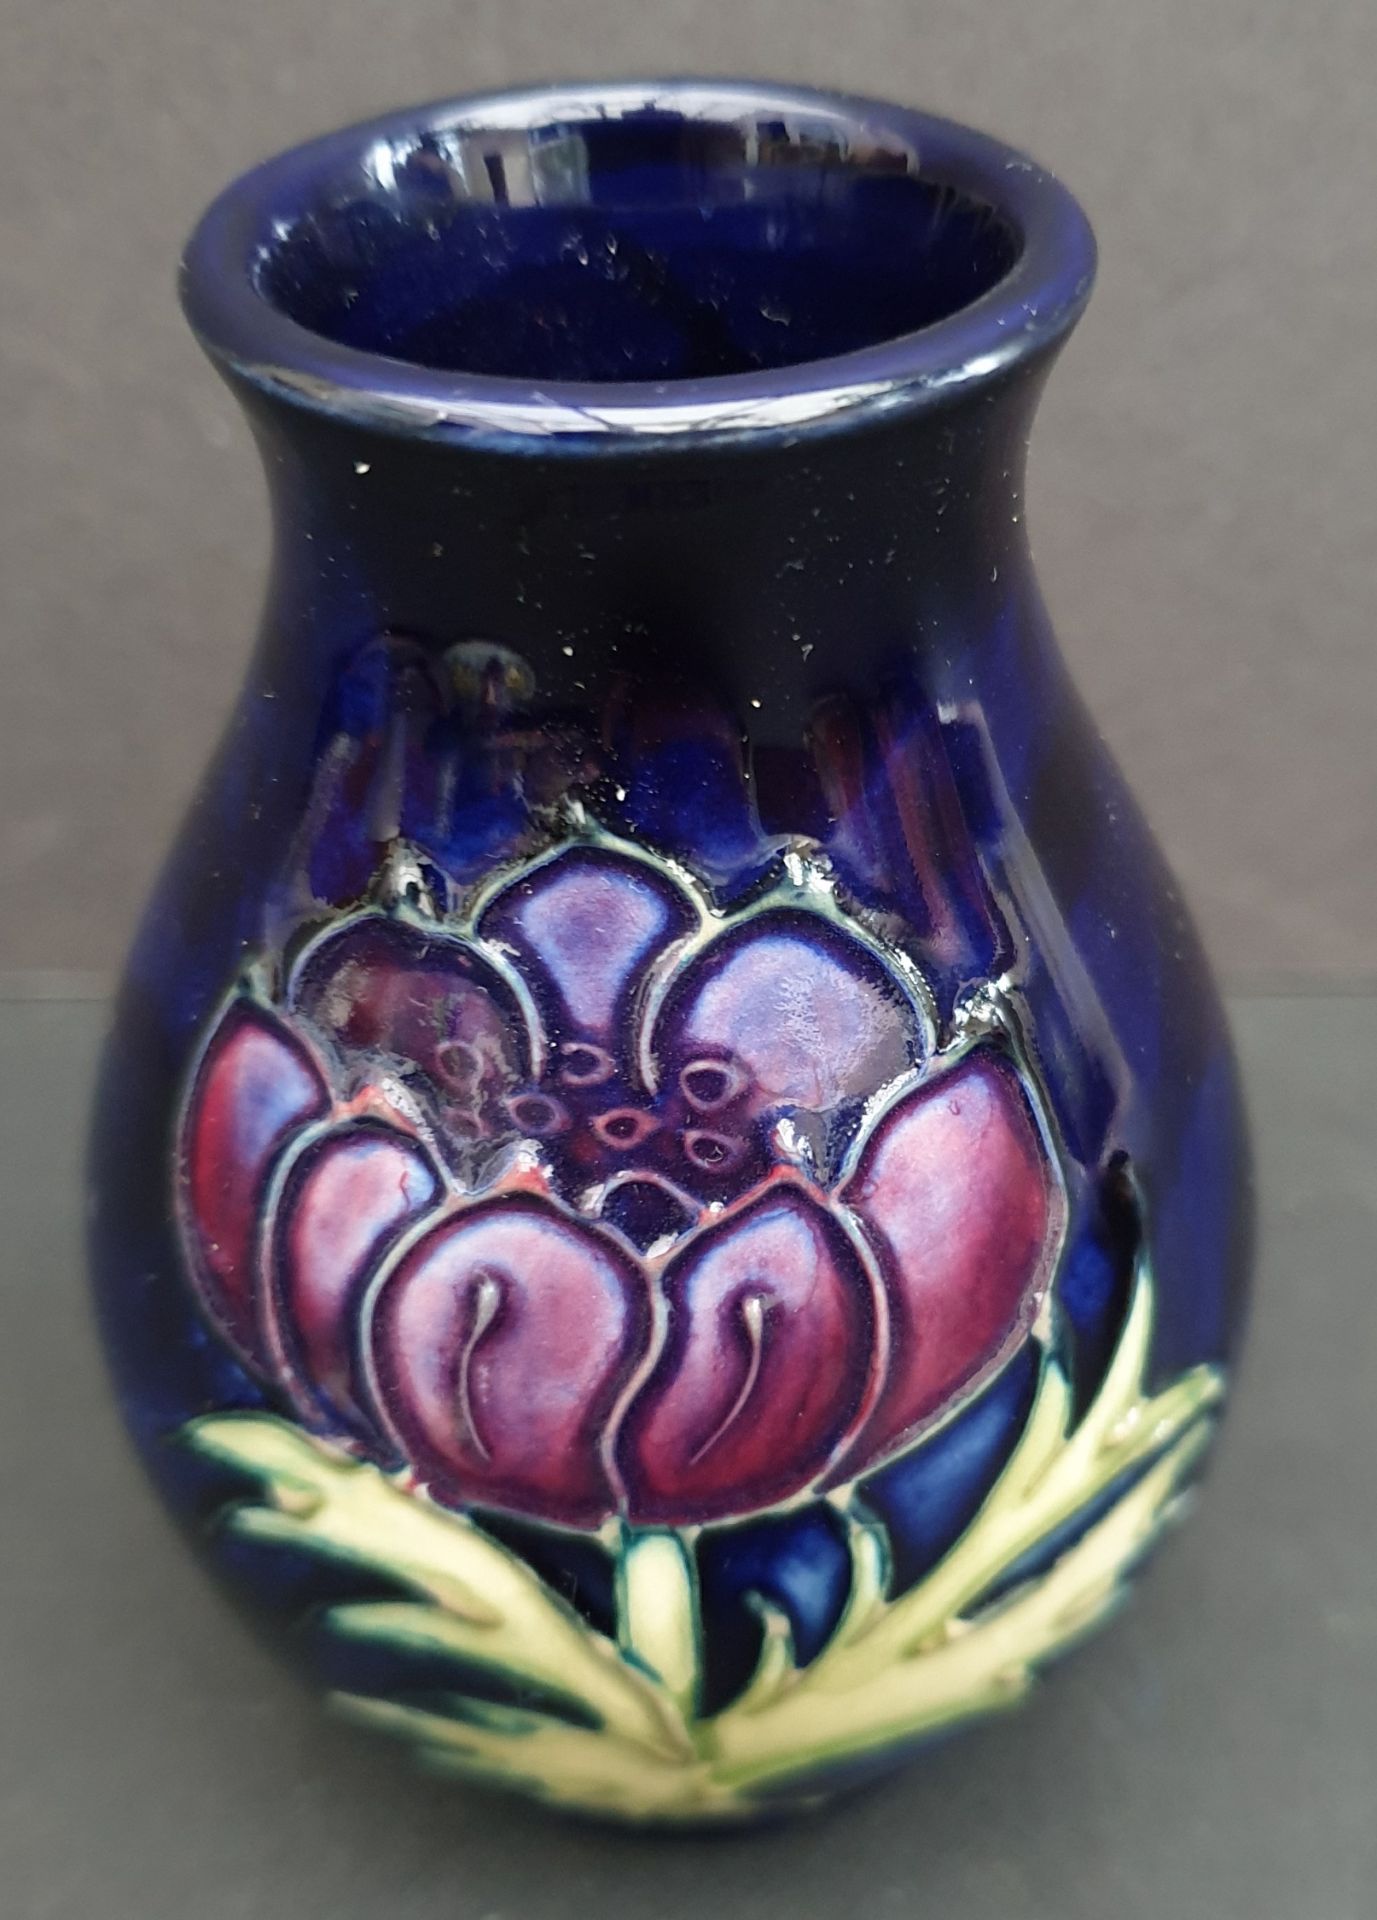 Vintage Collectable Moorcroft Vase Blue Ground 2 Flower Designs. Measures 8cm Tall. Part of a recent - Image 2 of 3